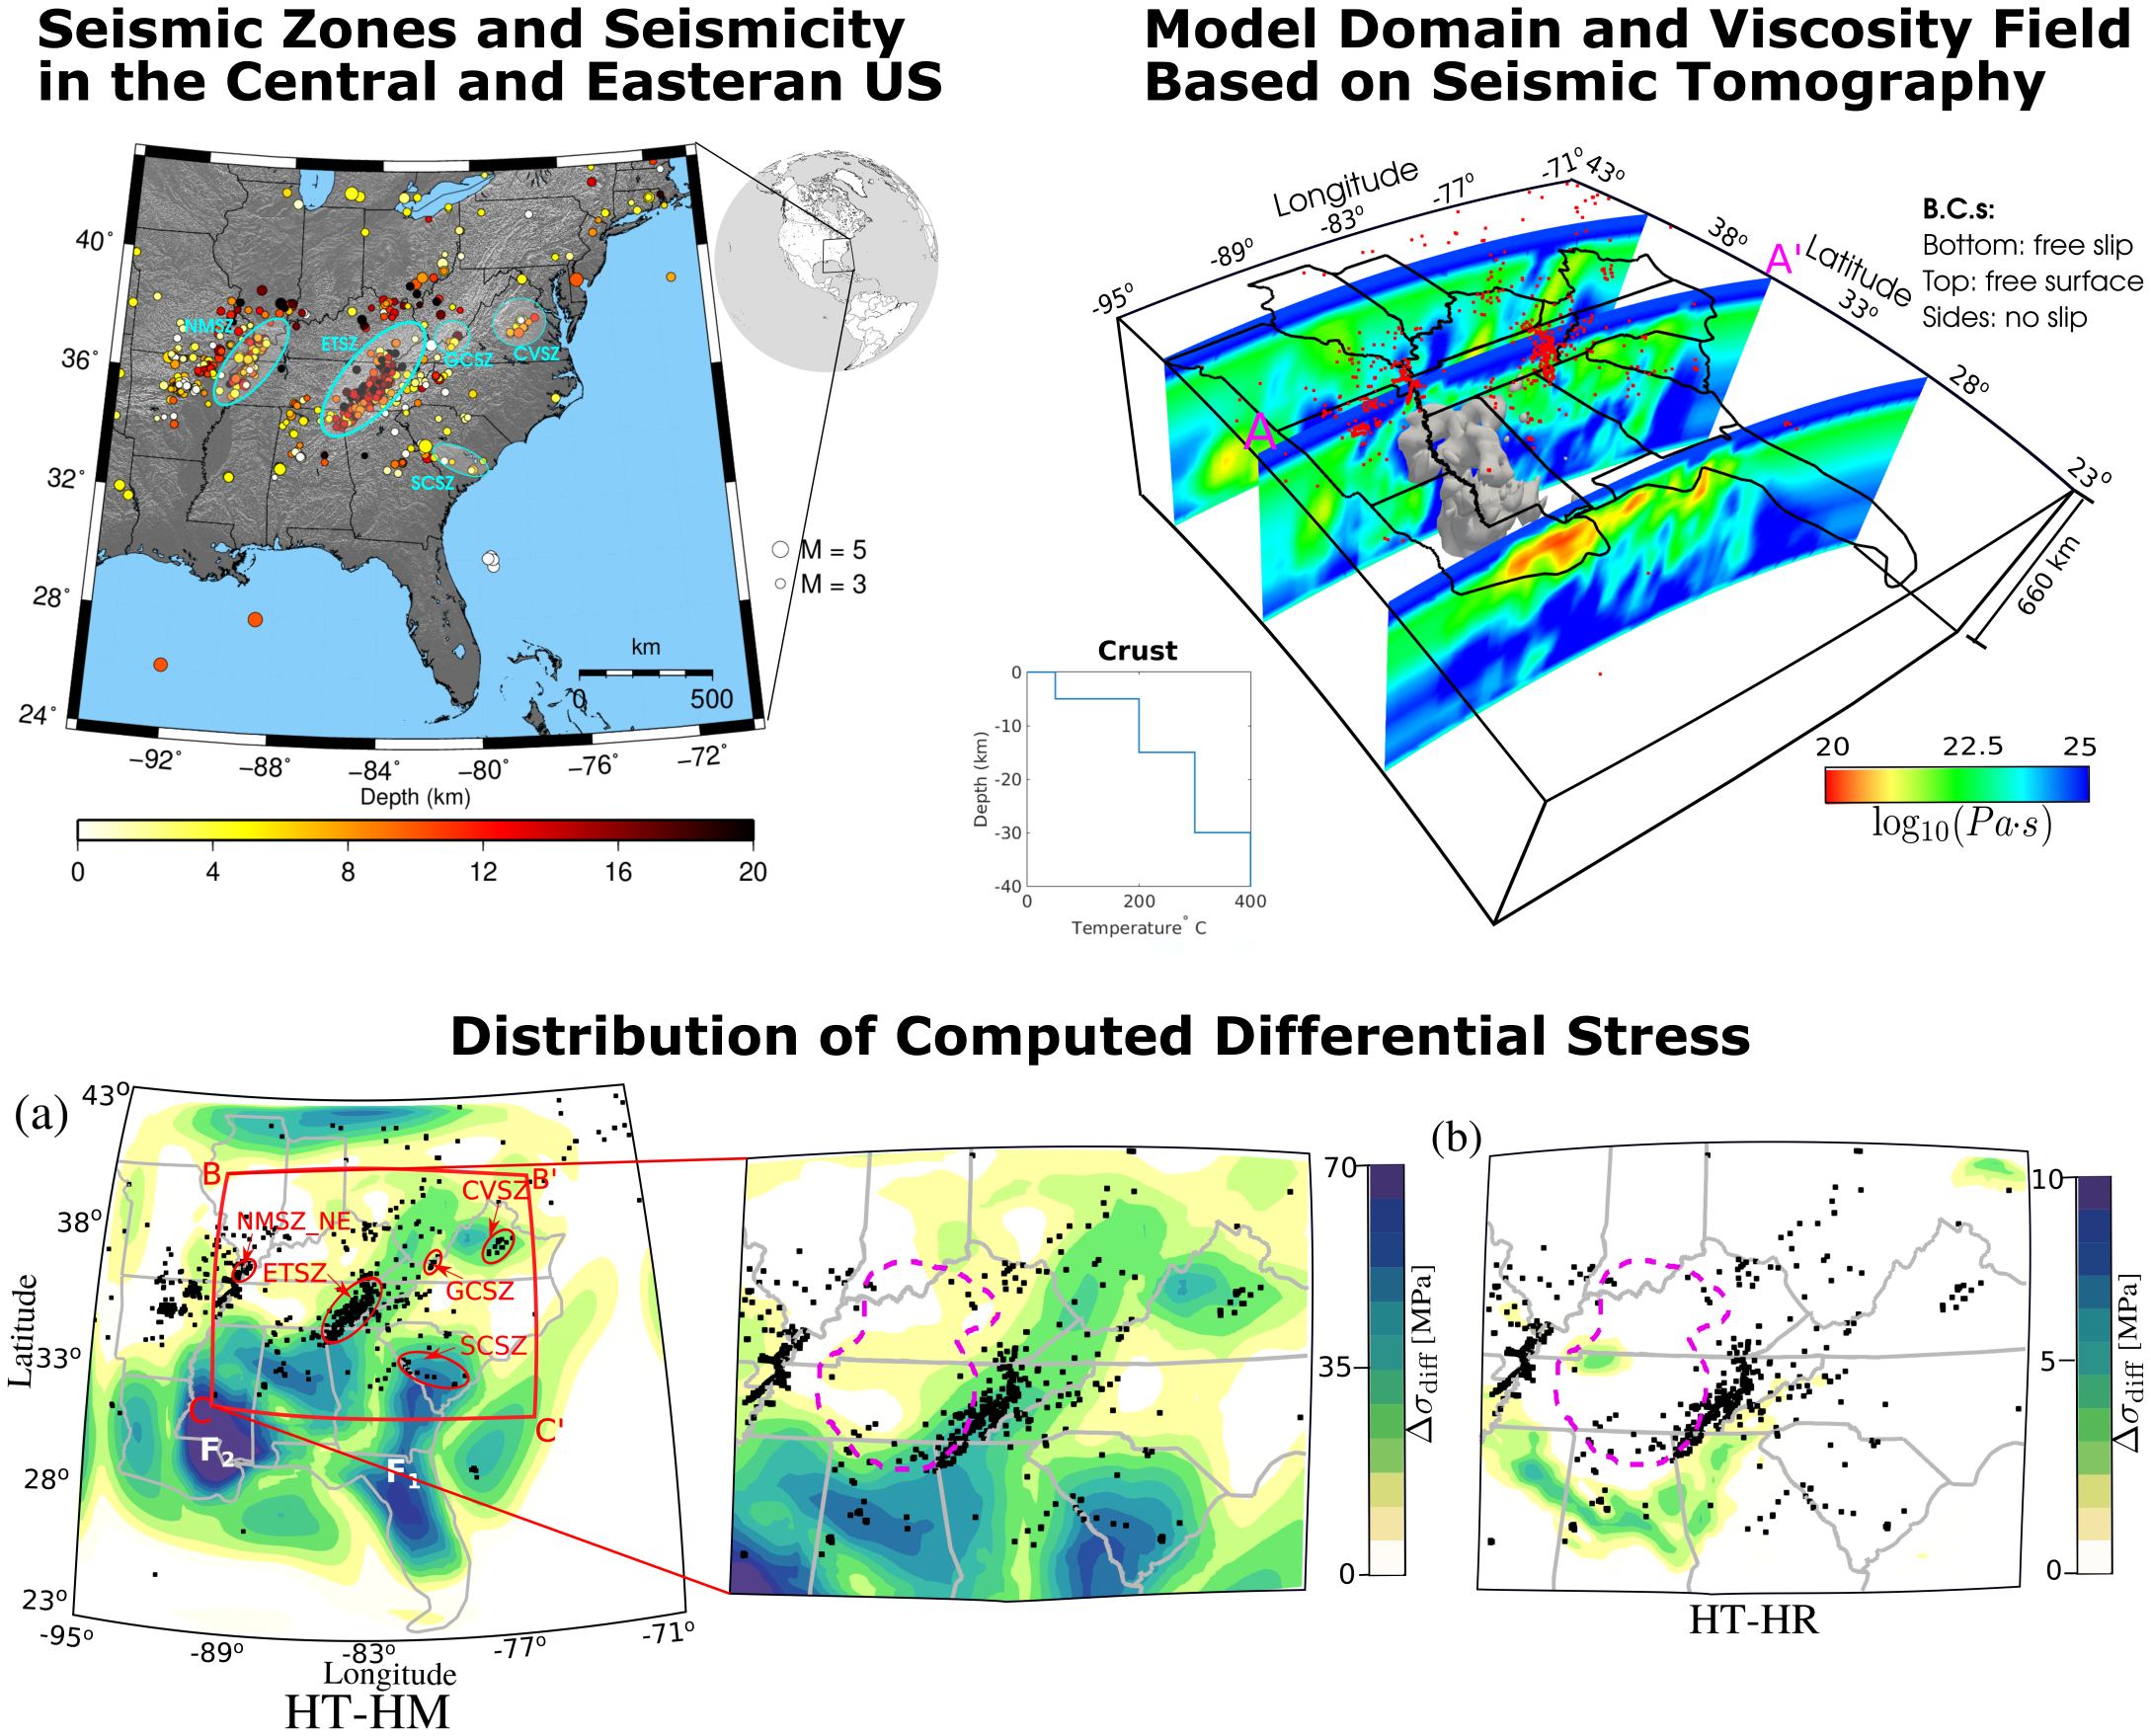 A study on the seismic zones in the Central and Eastern US. The upper mantle heterogeneities clearly contribute to differerntial stresses in the known seismic zones. Discrepancy between the predicted and the observed faulting styles are attributed to stress sources not included in this study. For more details, see [(Saxena et al., GJI, 2021)](https://cerigeodyn.netlify.app/publication/saxena-seismicity-2021/)